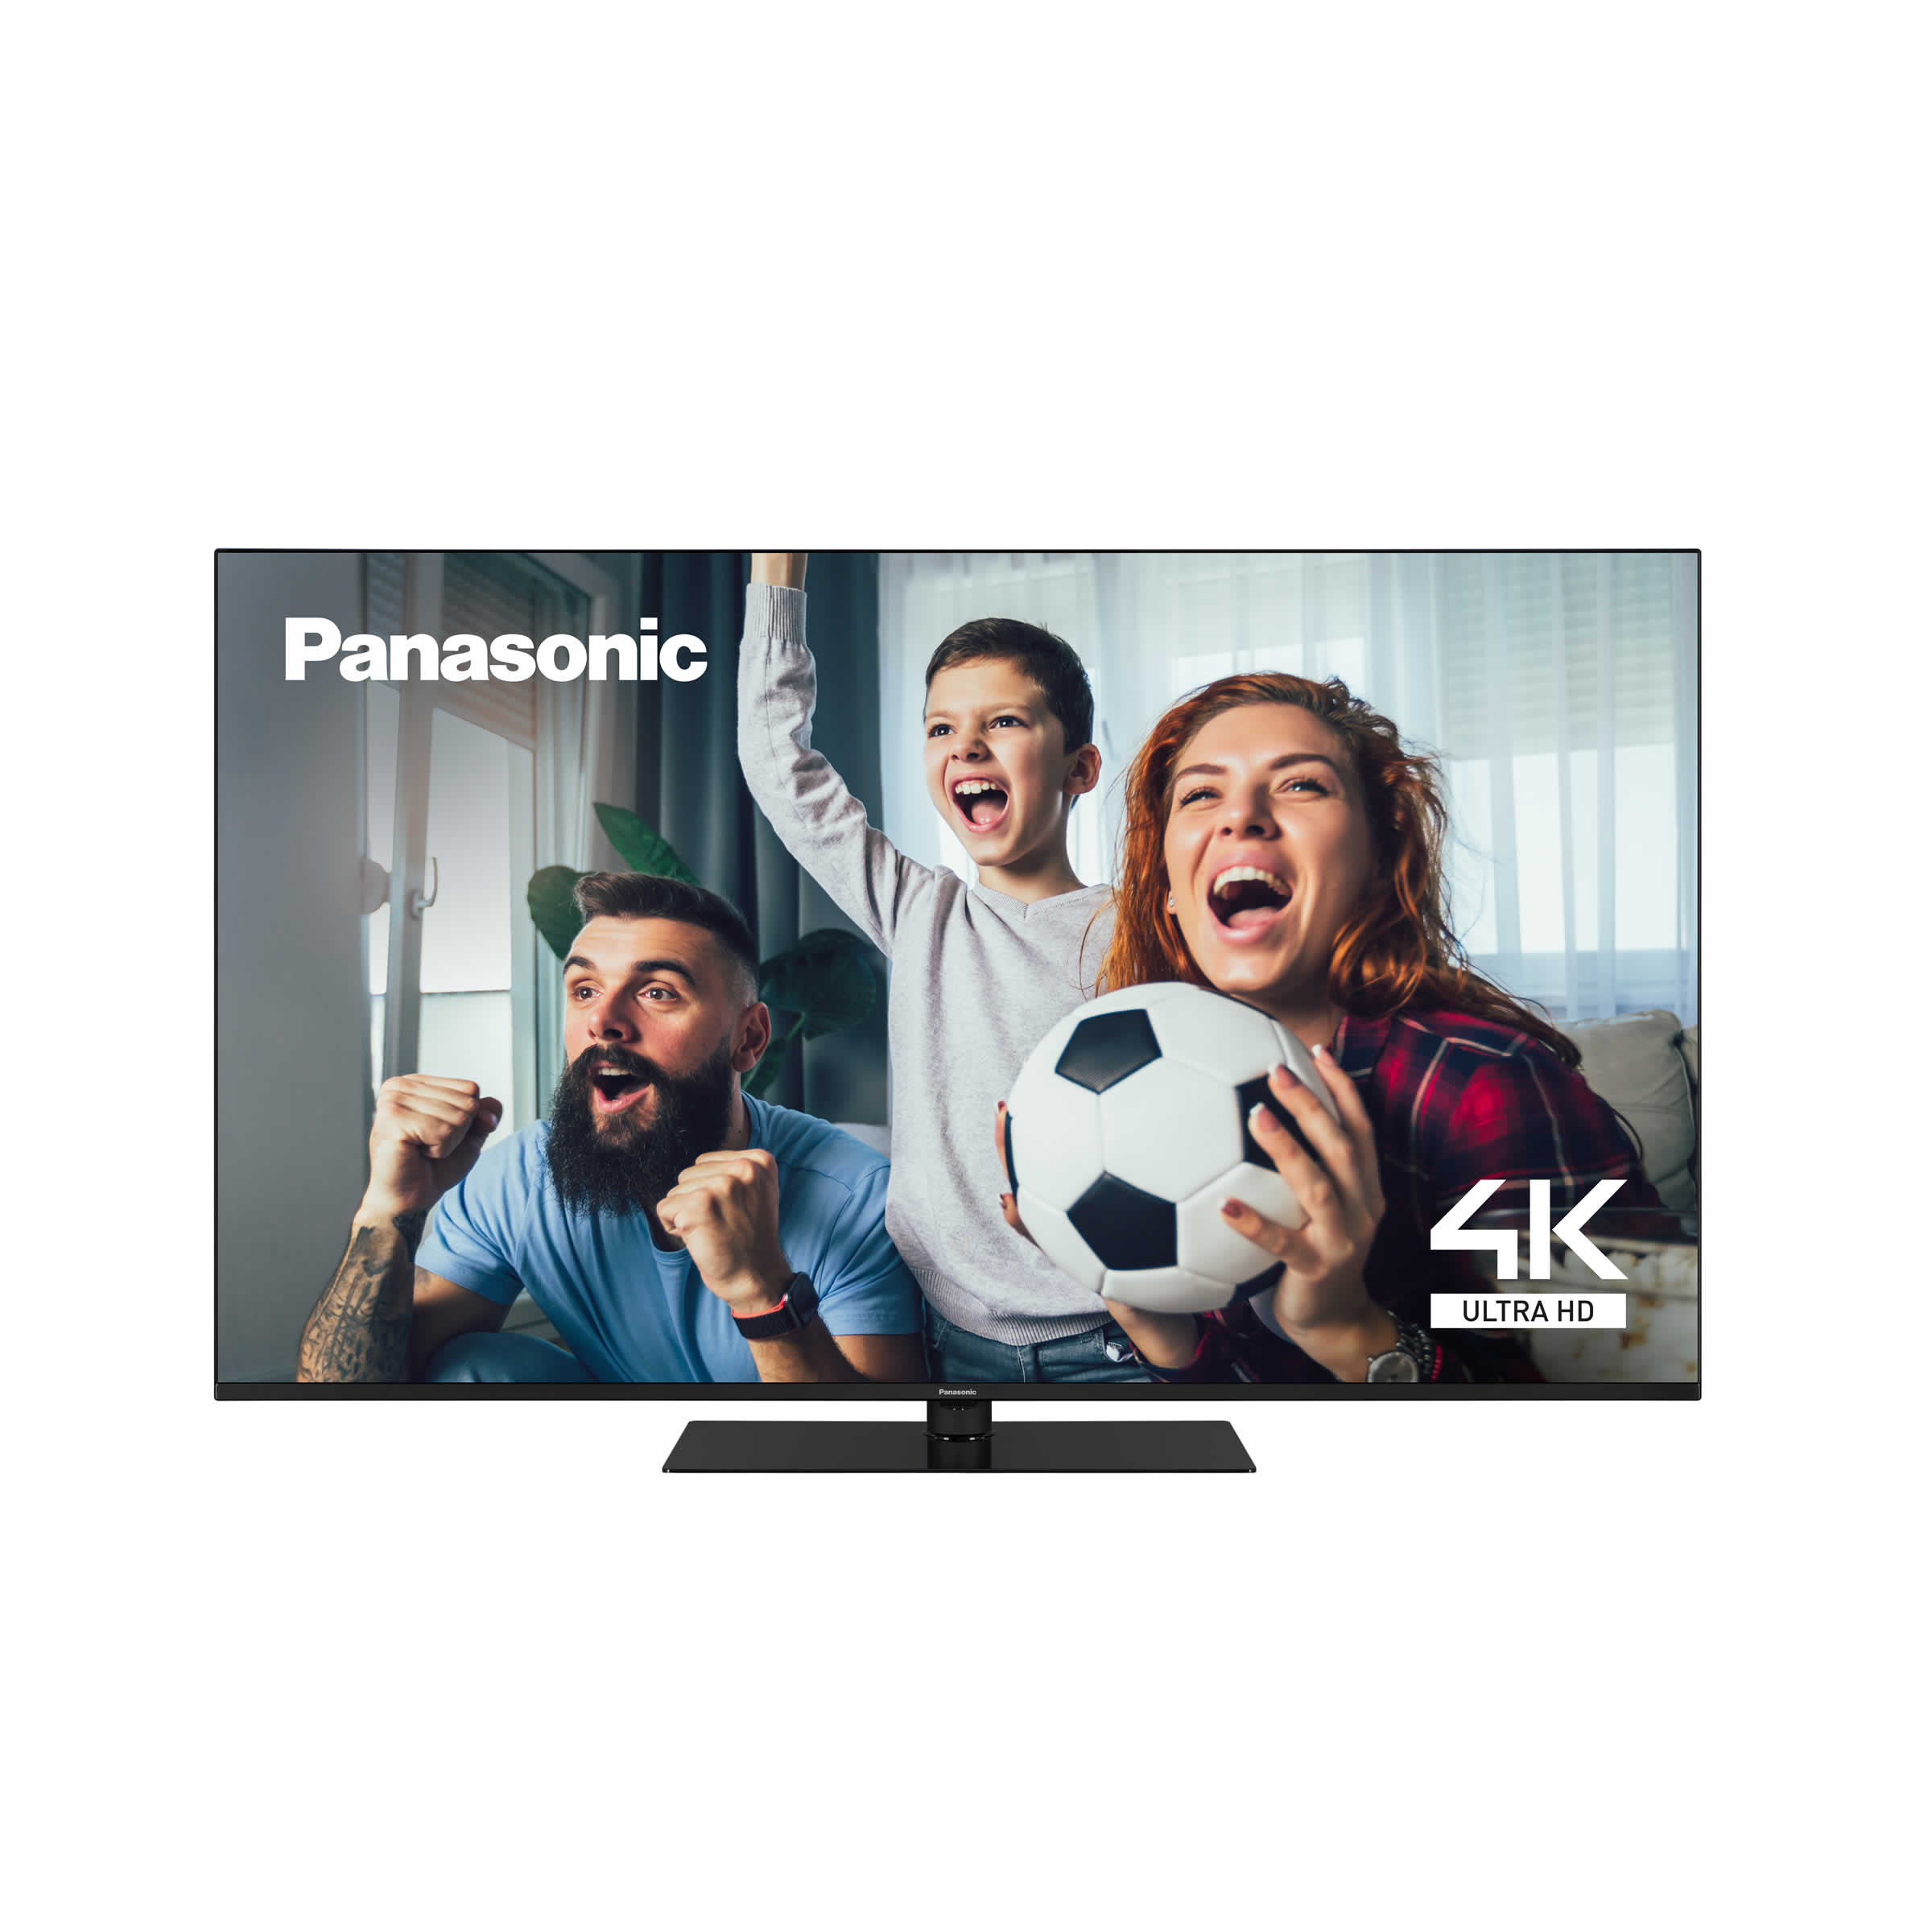 Panasonic 65inch Ultra HD 4K LED HDR10 SMART TV WiFi Android